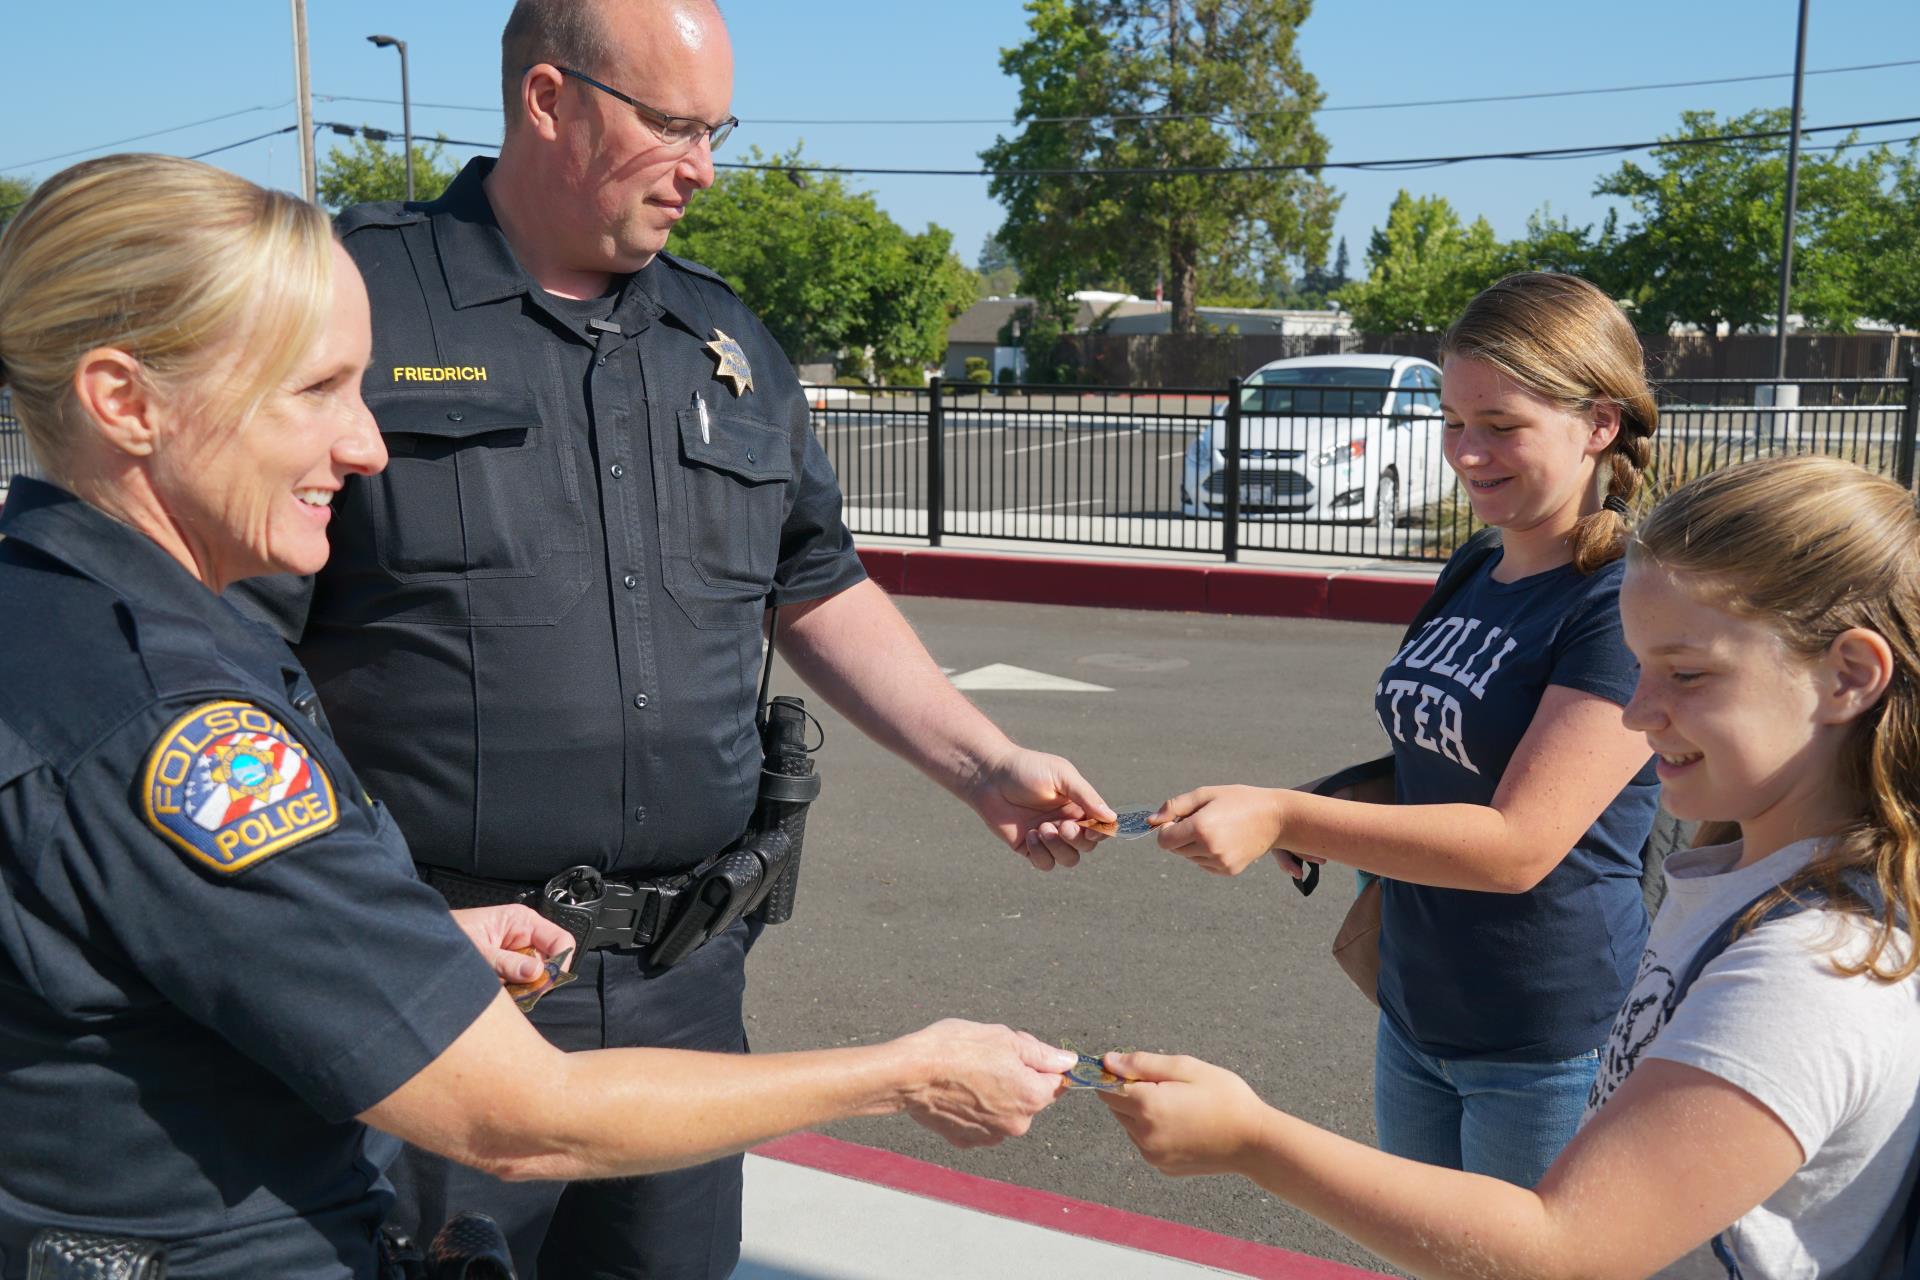 Officers handing stickers to kids